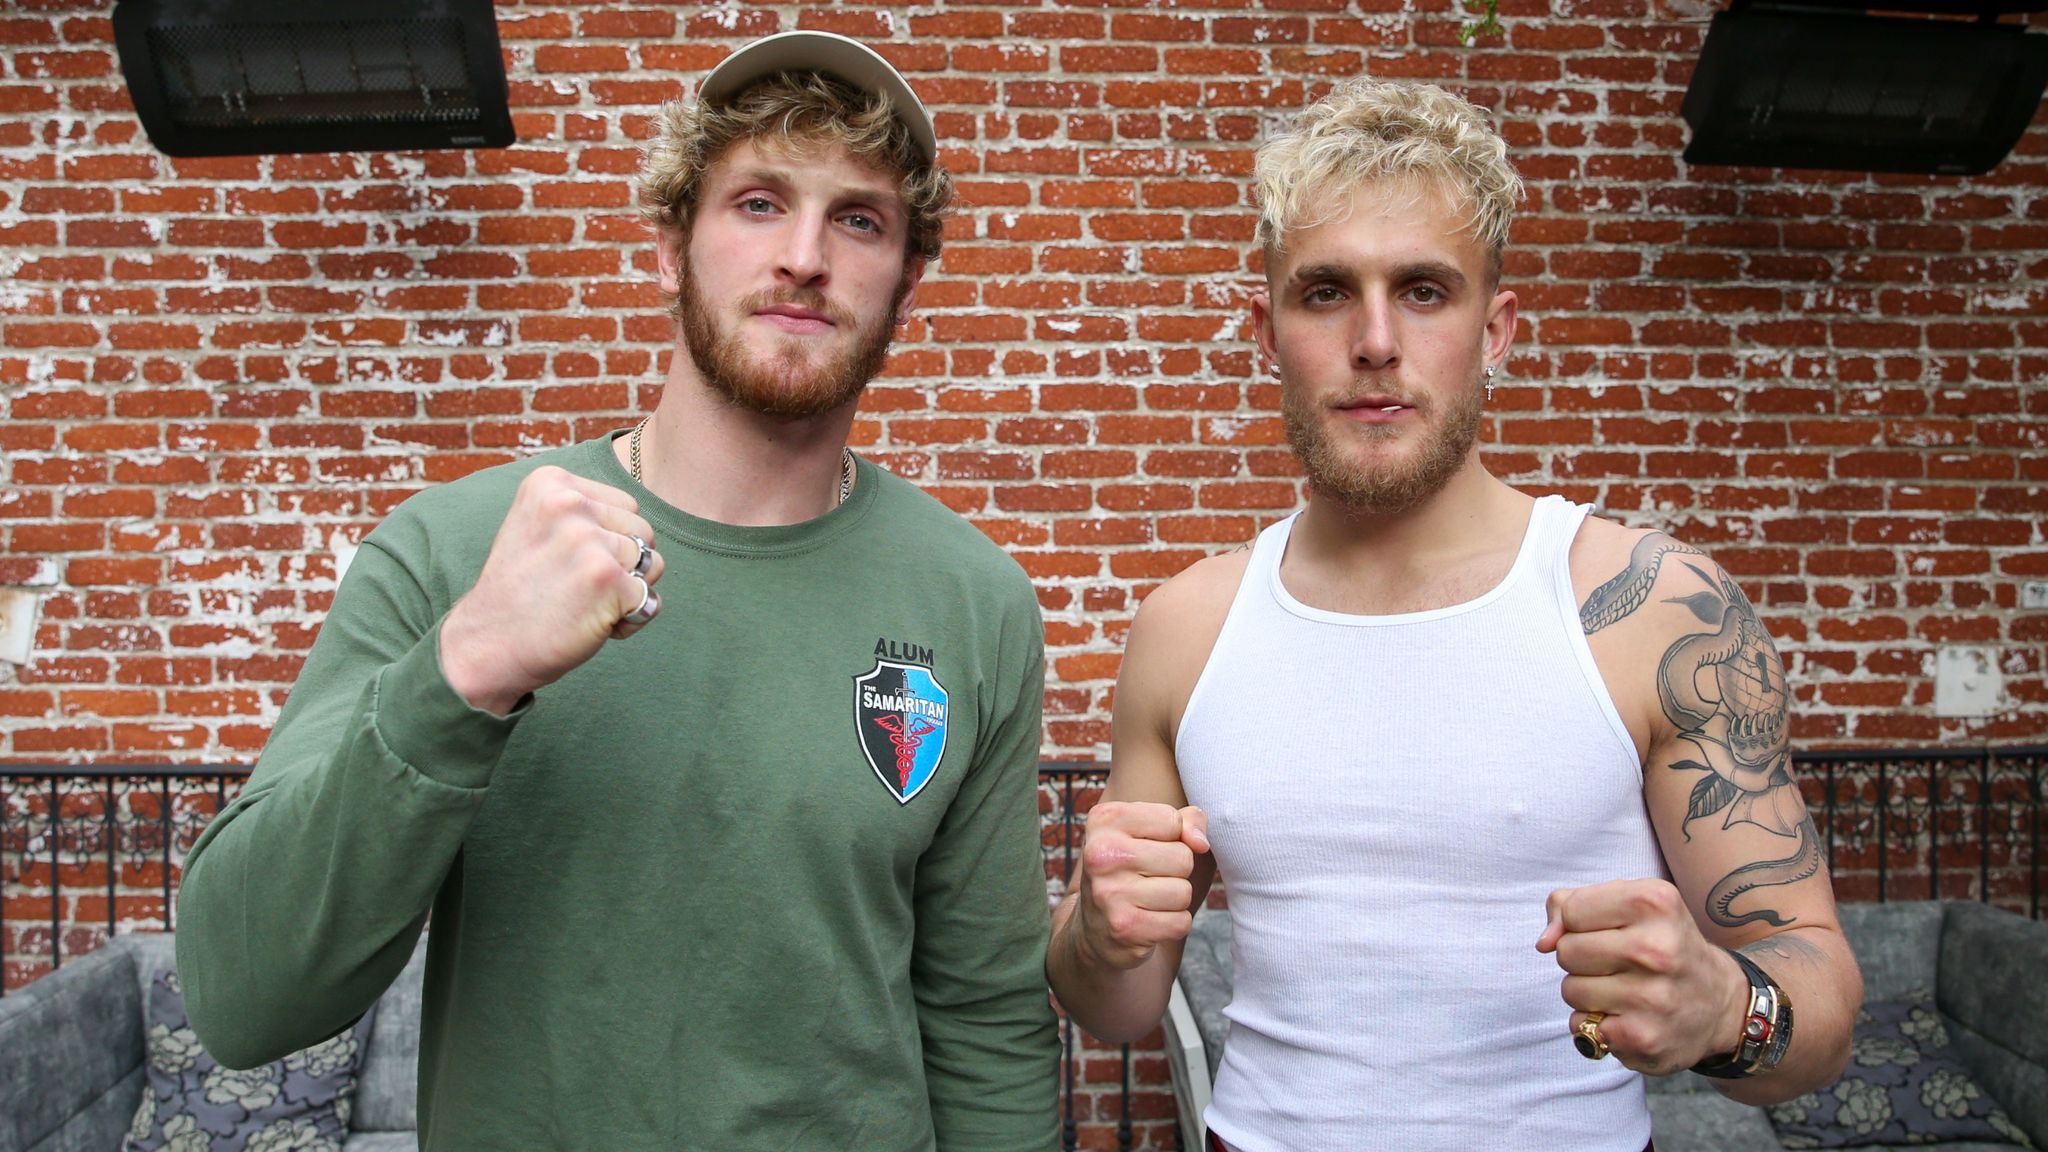 Jake Paul Vs Anesongib Youtuber Boxing Is Back But For How Long